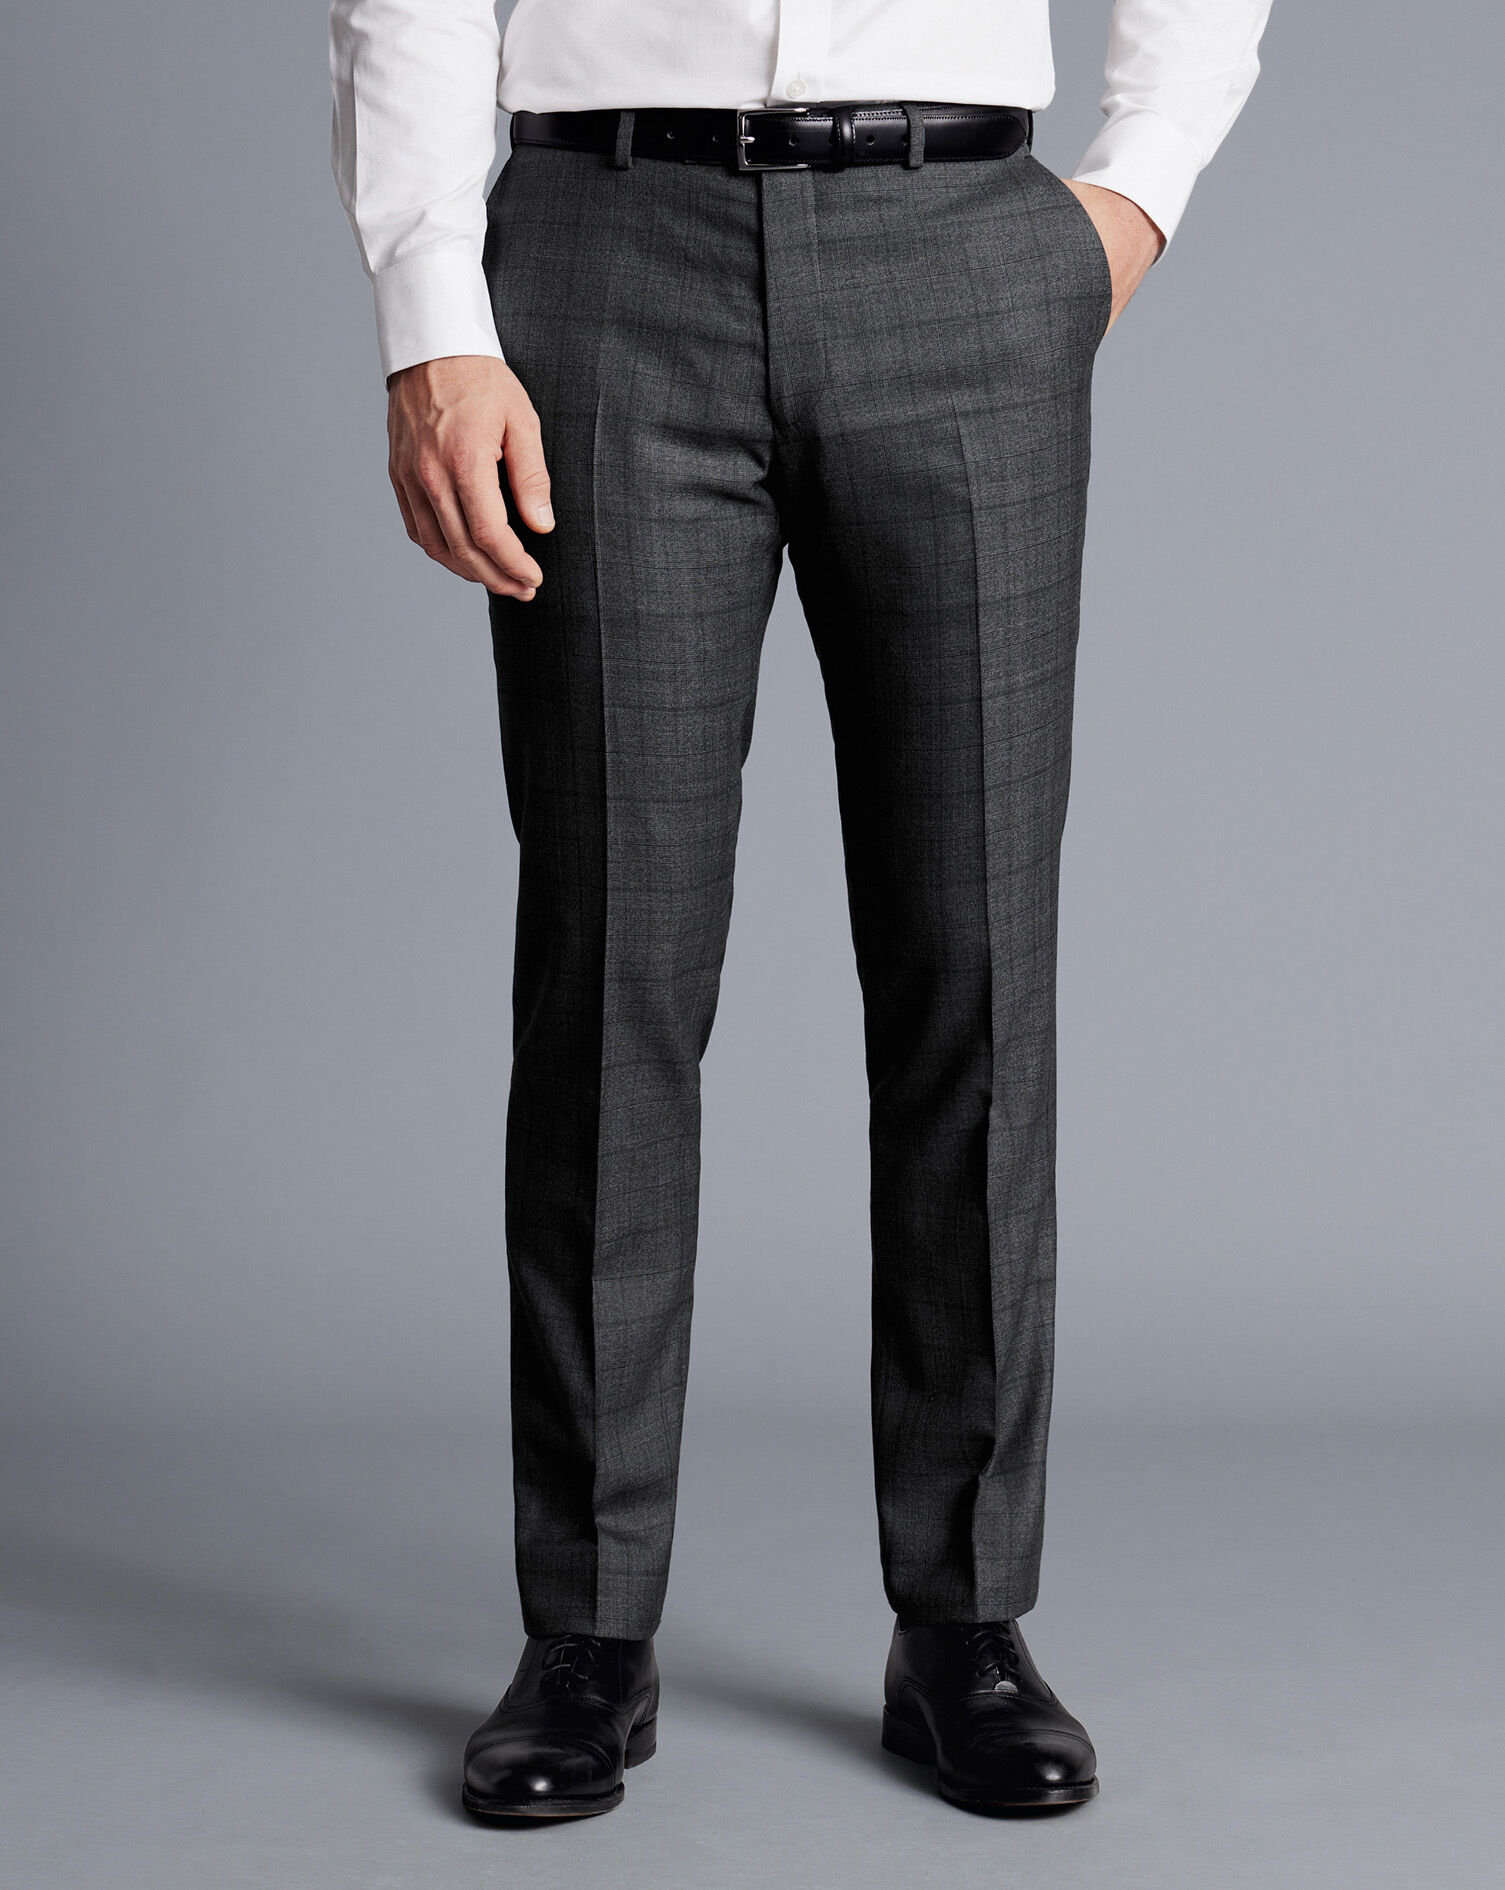 Newest Grey Men Suit Pants Custom Made Cheap Slim Fit Trousers Trousers  Groom Best Man Formal Wear From Huifangzou, $36.79 | DHgate.Com